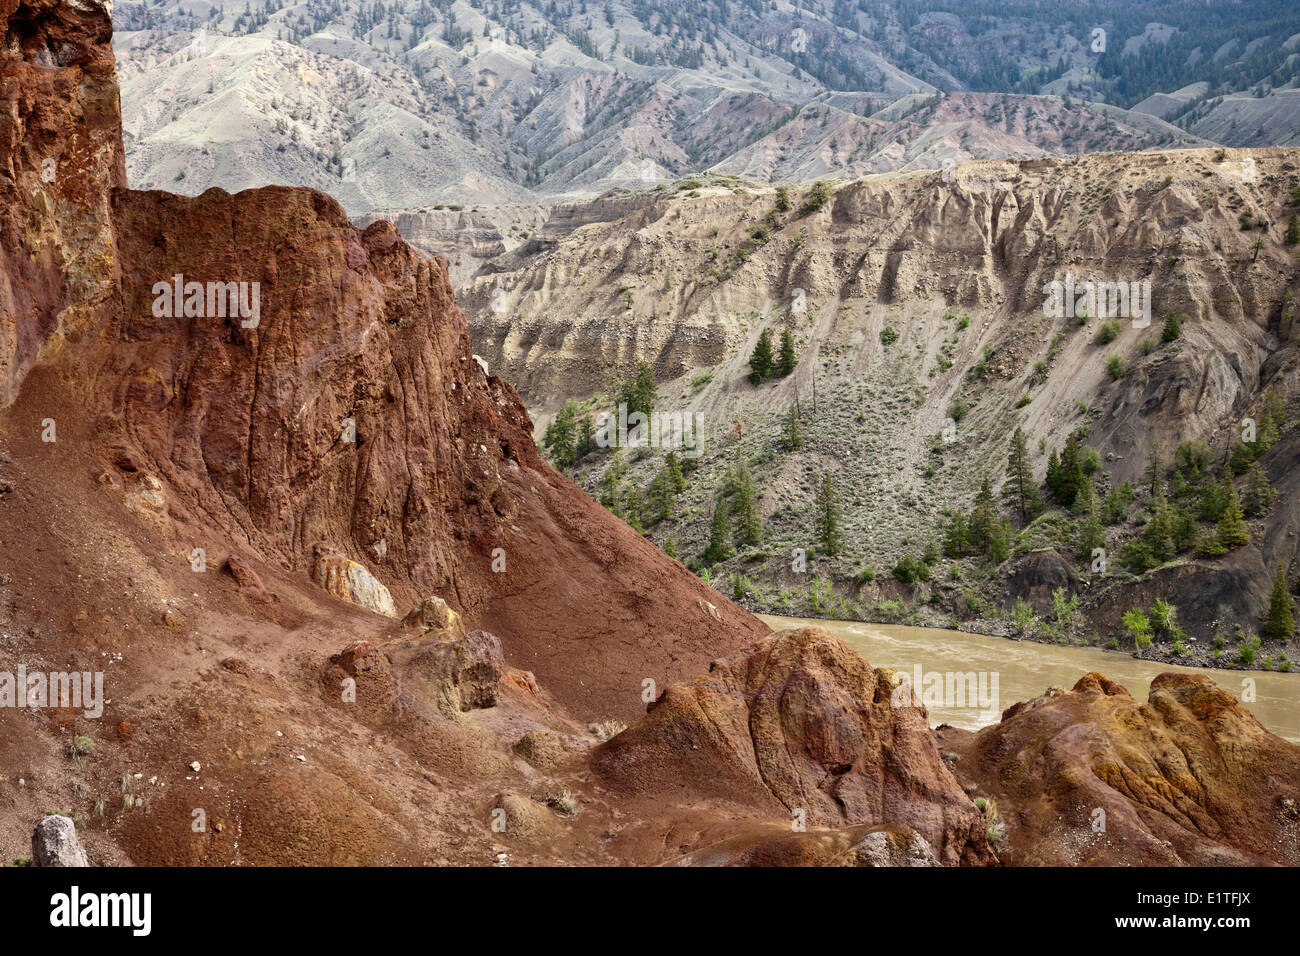 Geological formation along the Fraser River Canyon Stock Photo